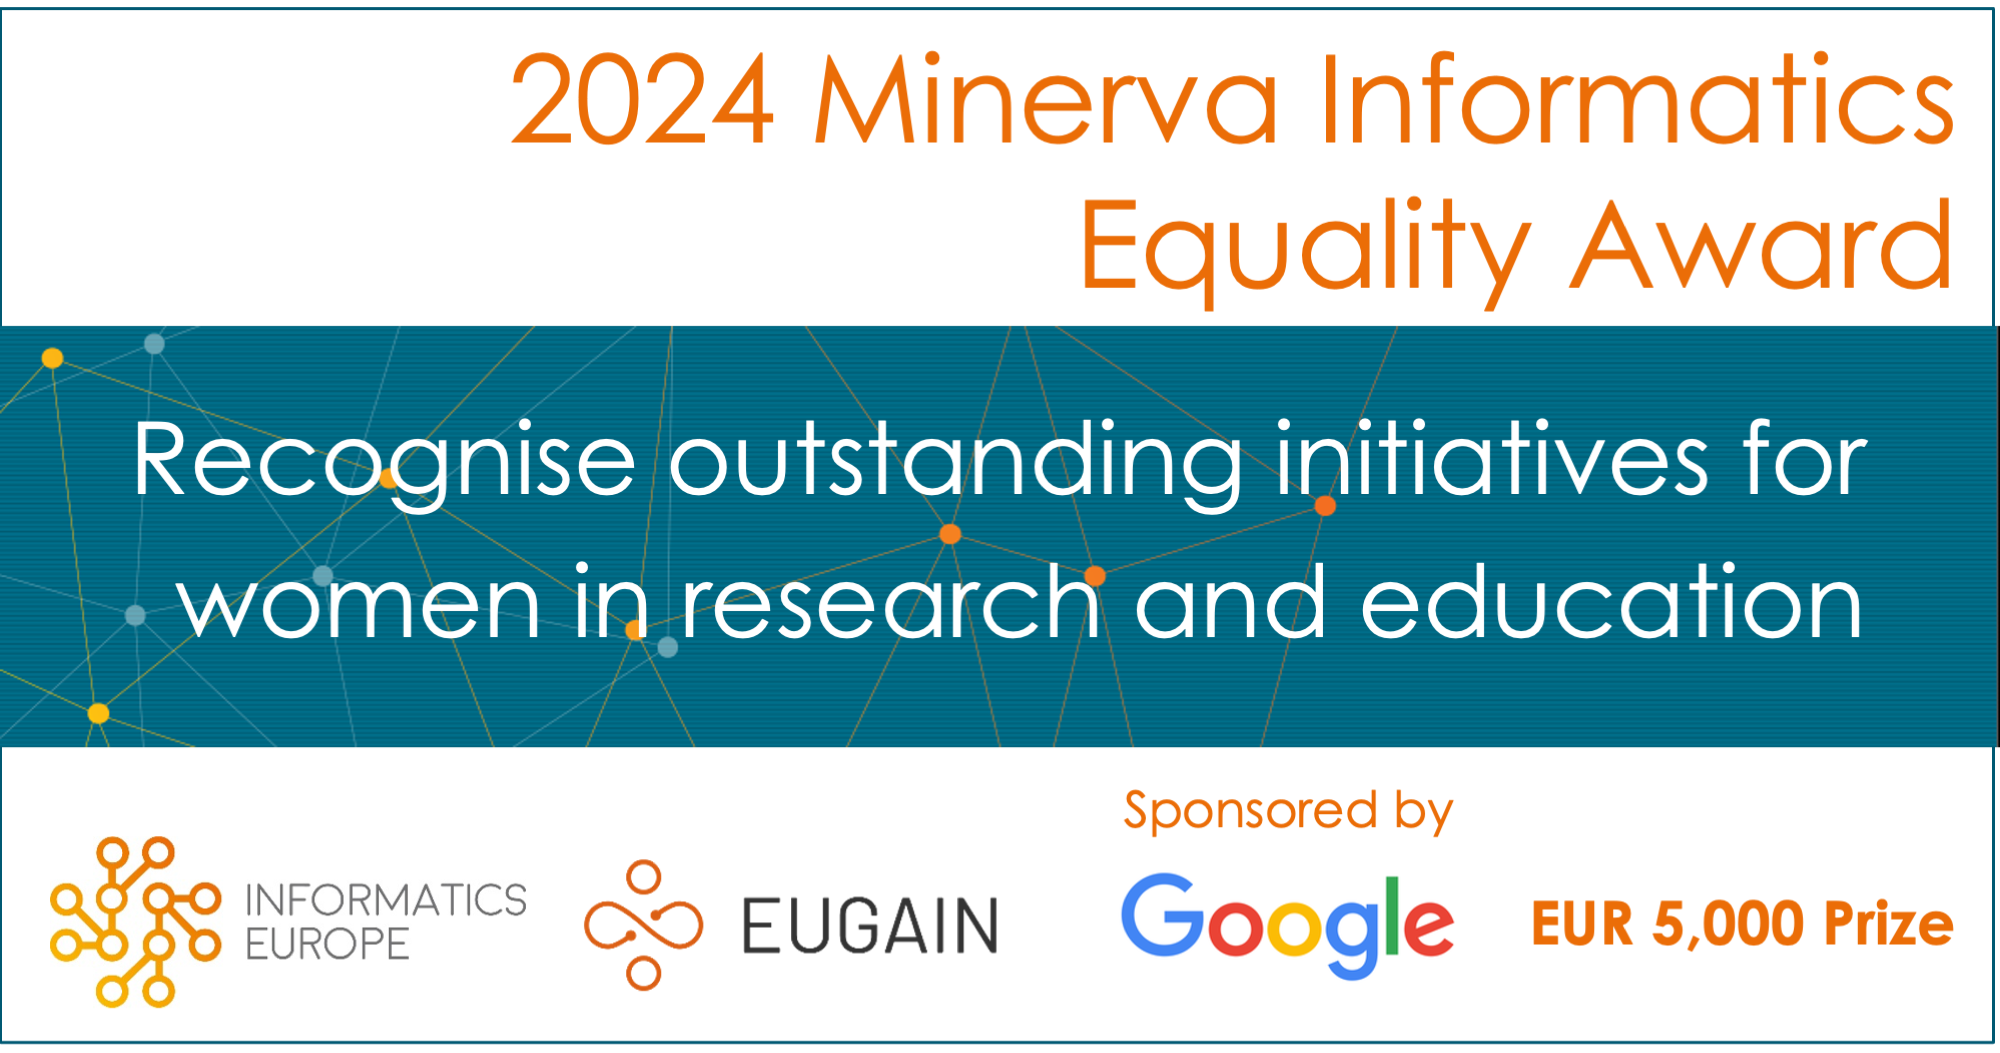 Nominate Now for 2024 Minerva Informatics Equality Award